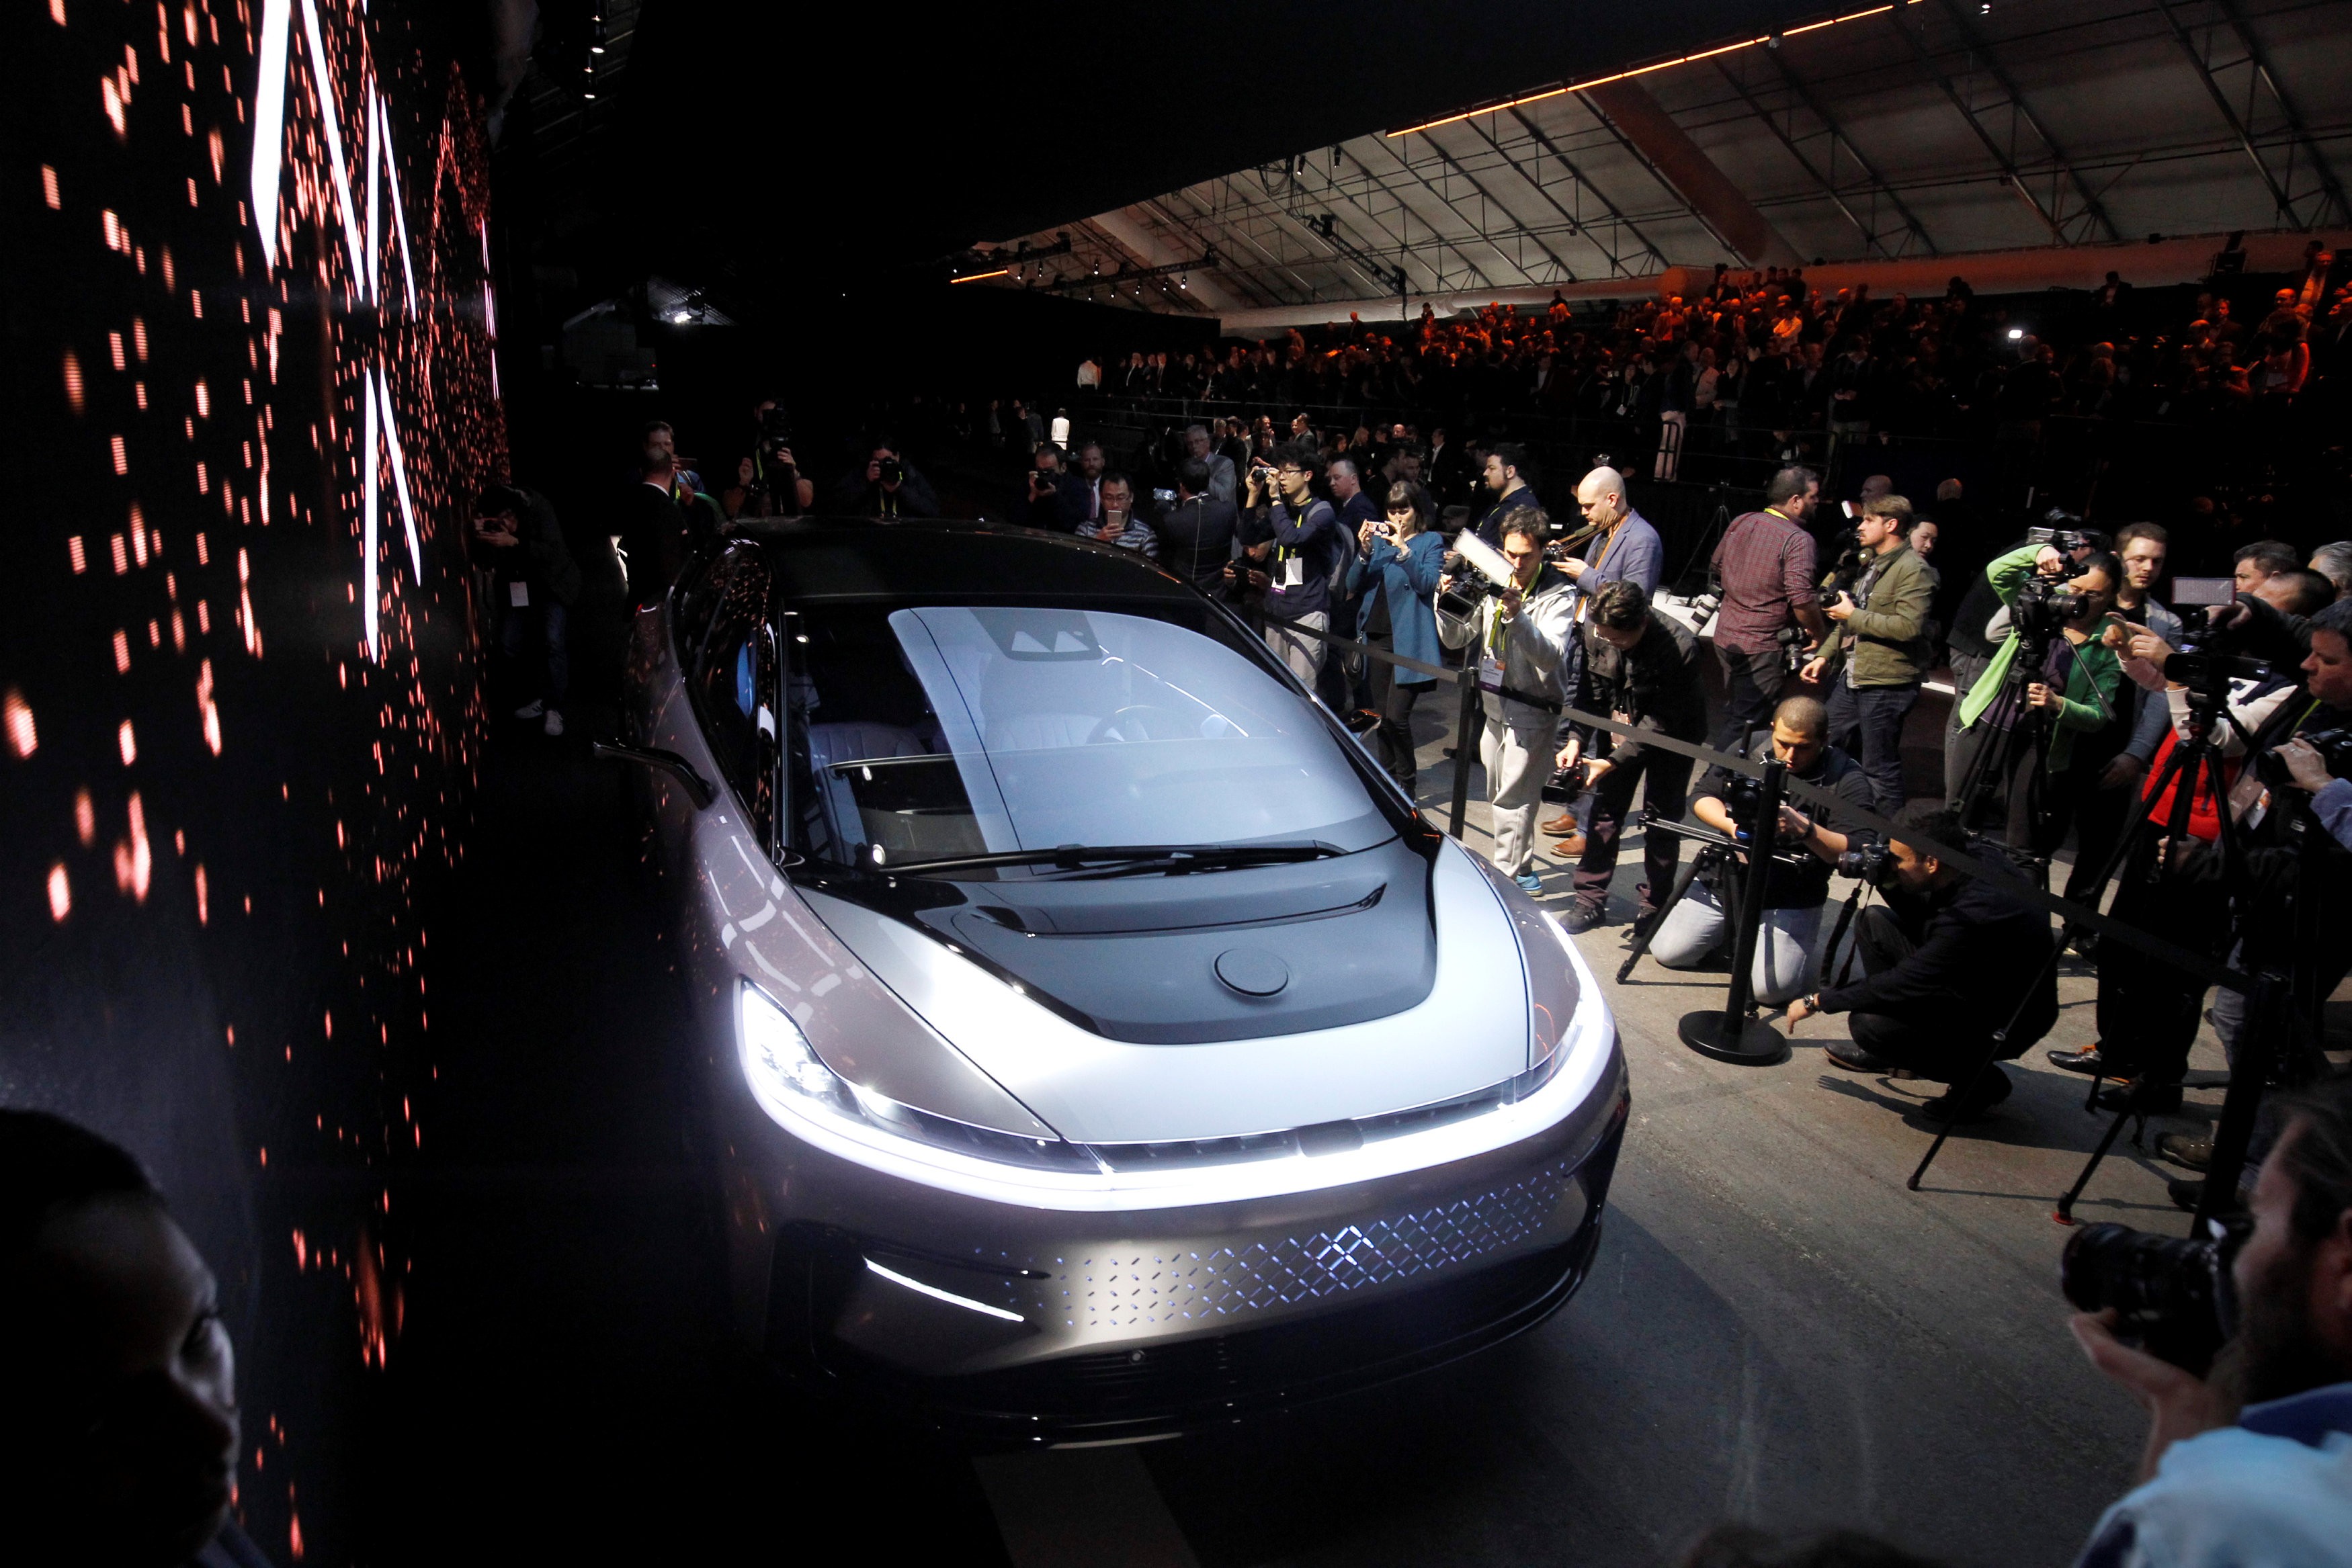 Journalists gather around a Faraday Future FF 91 electric car during an unveiling event at CES in Las Vegas, on January 3, 2017. Photo: Reuters